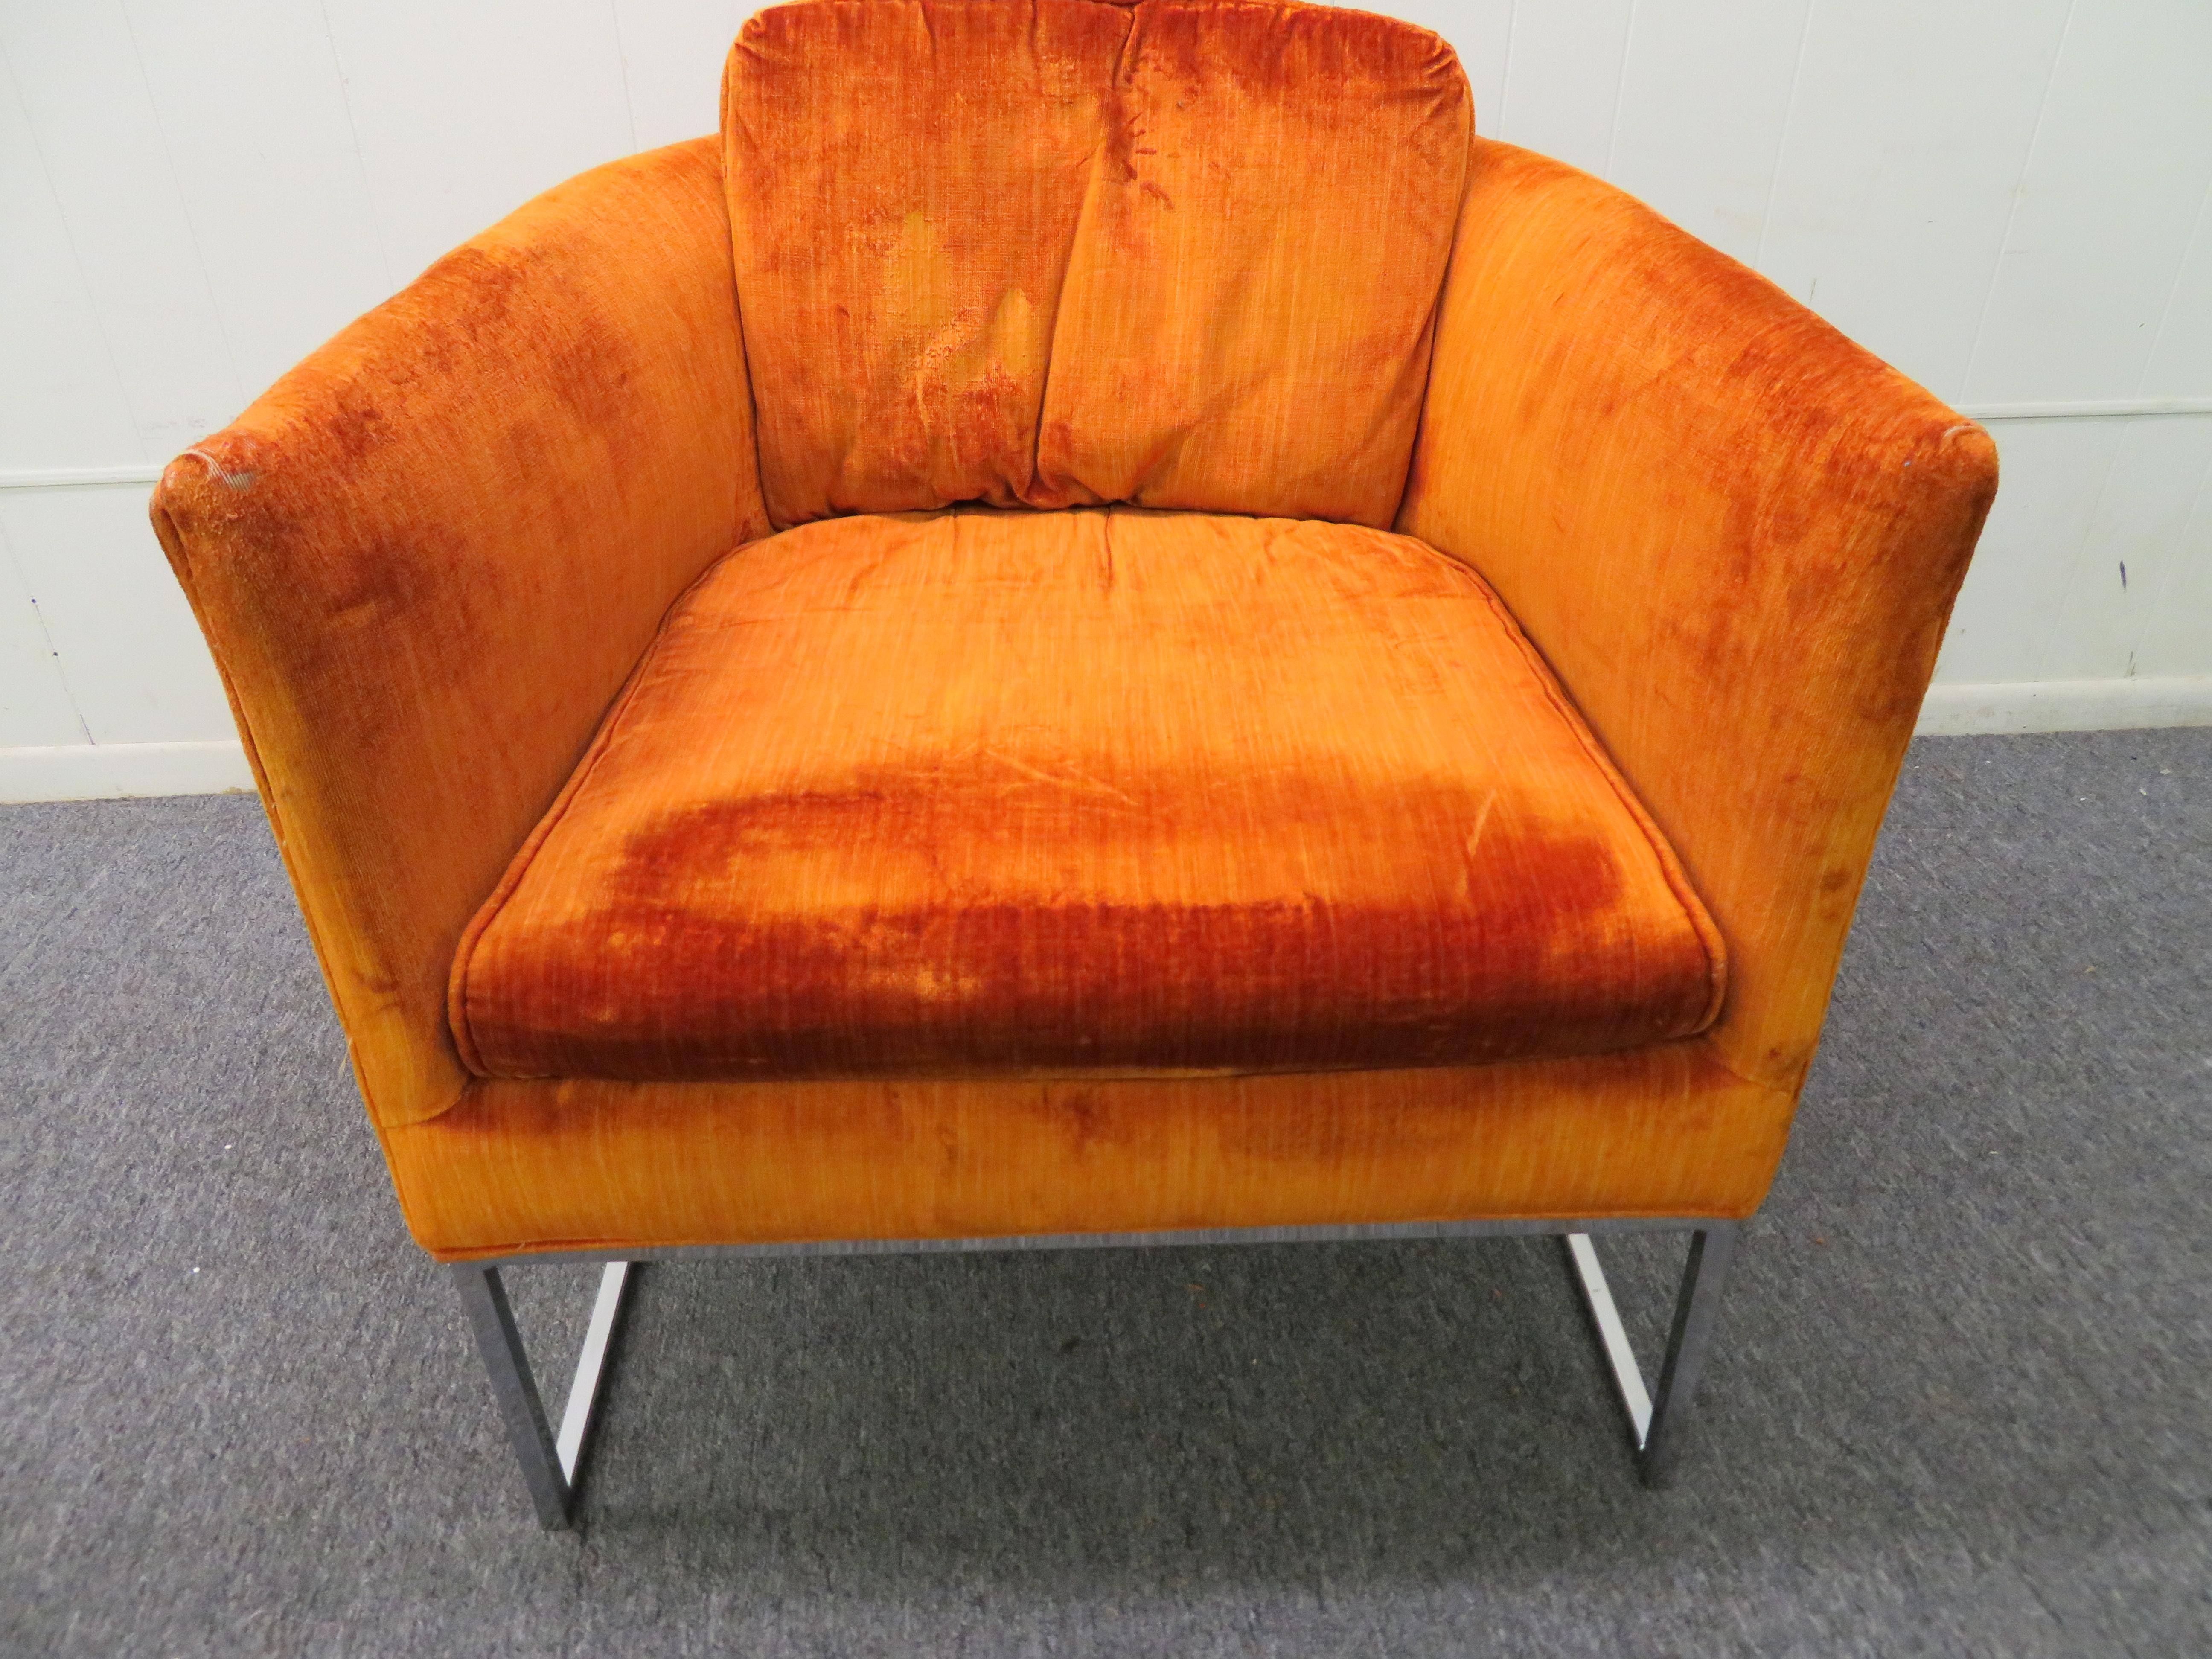 Lovely Milo Baughman style chrome thin frame barrel back lounge chair. This chair retains its original orange velvet that does show wear, re-upholstery is recommended. We love the delicate chrome base giving the illusion of this chair floating.